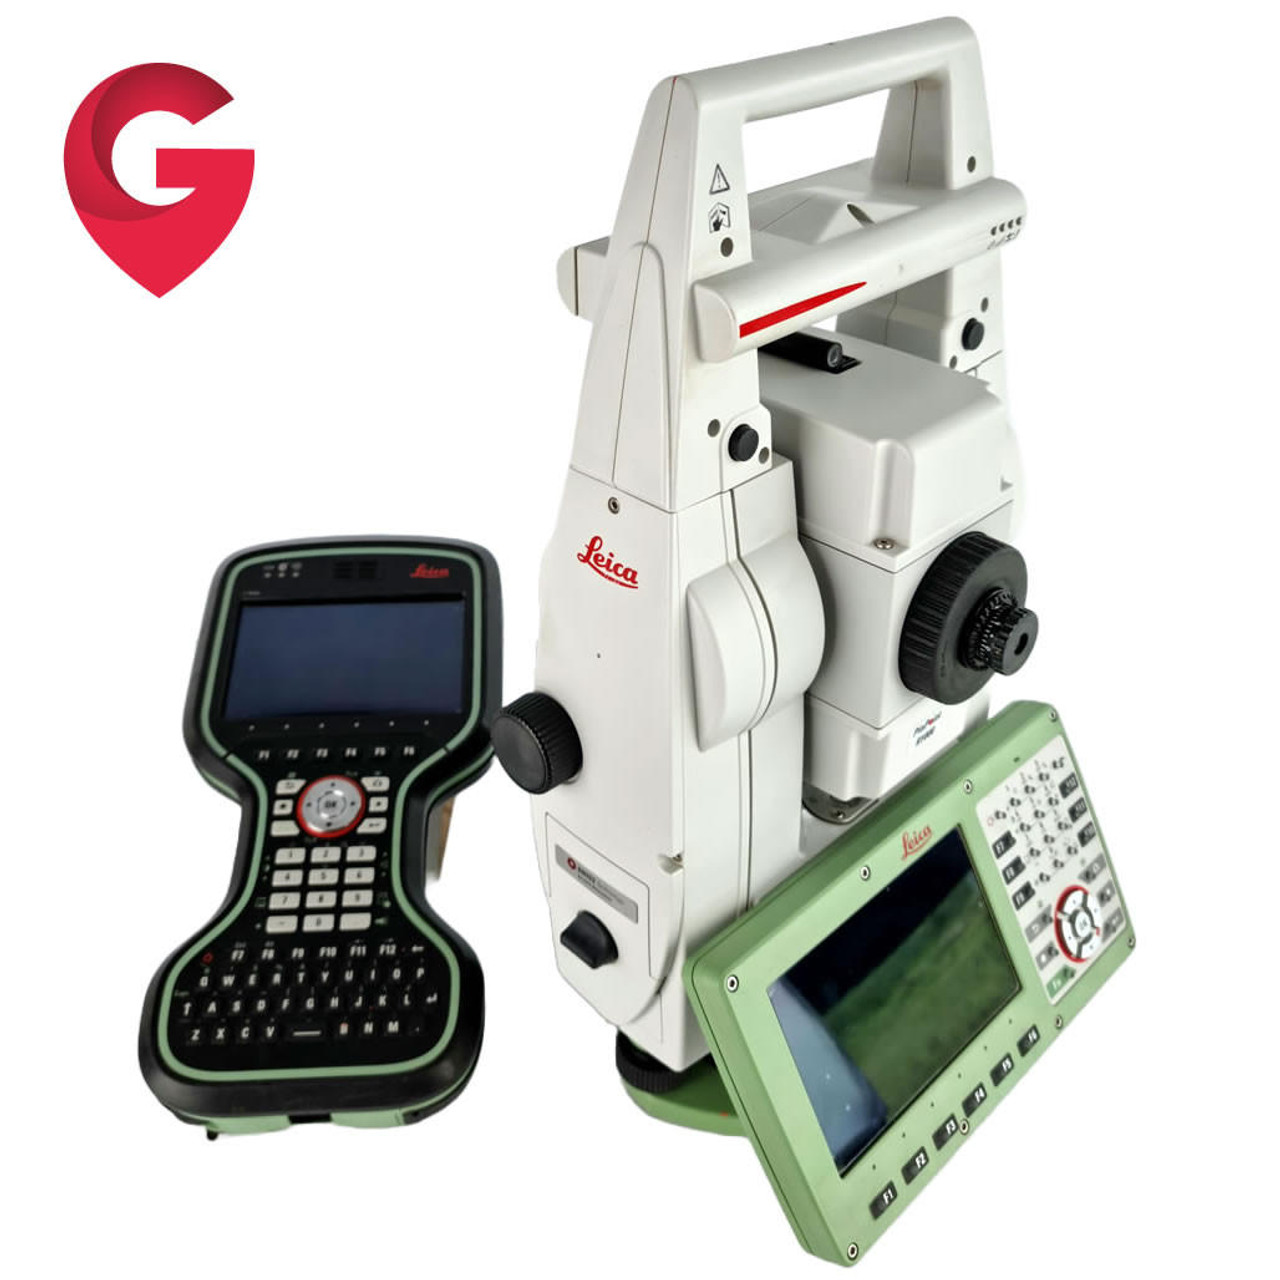 Leica Geosystems Leica TS16 1 R500 Robotic Total Station PS - Used